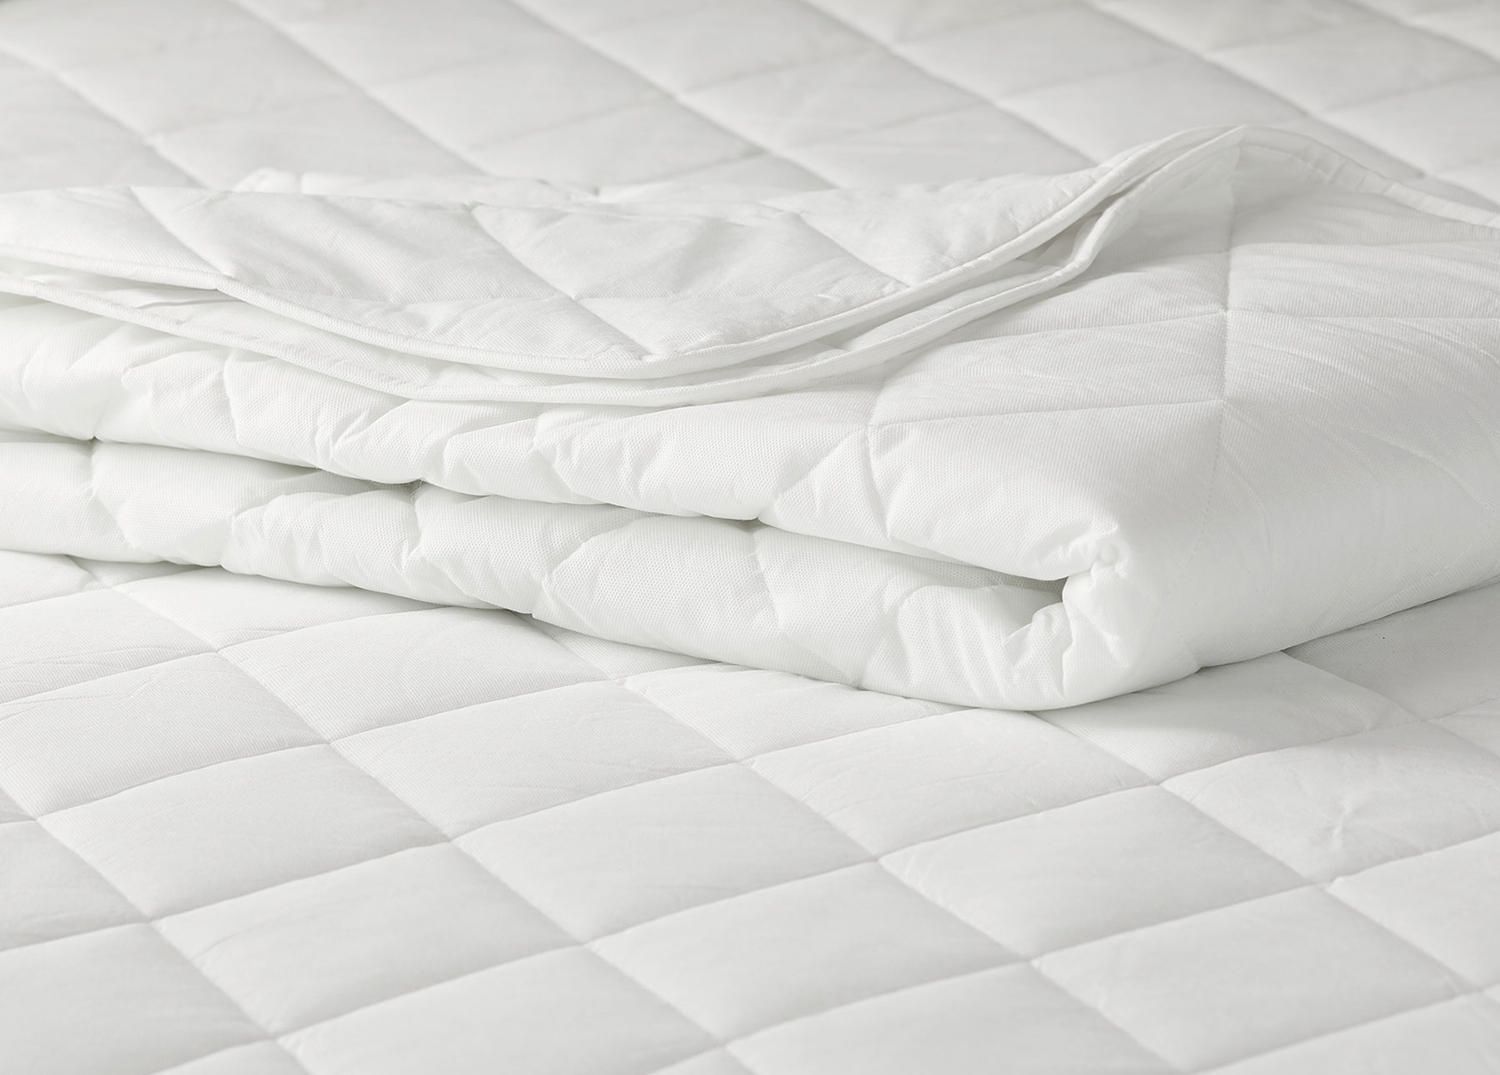 cozyat quilted cotton mattress protector queen size